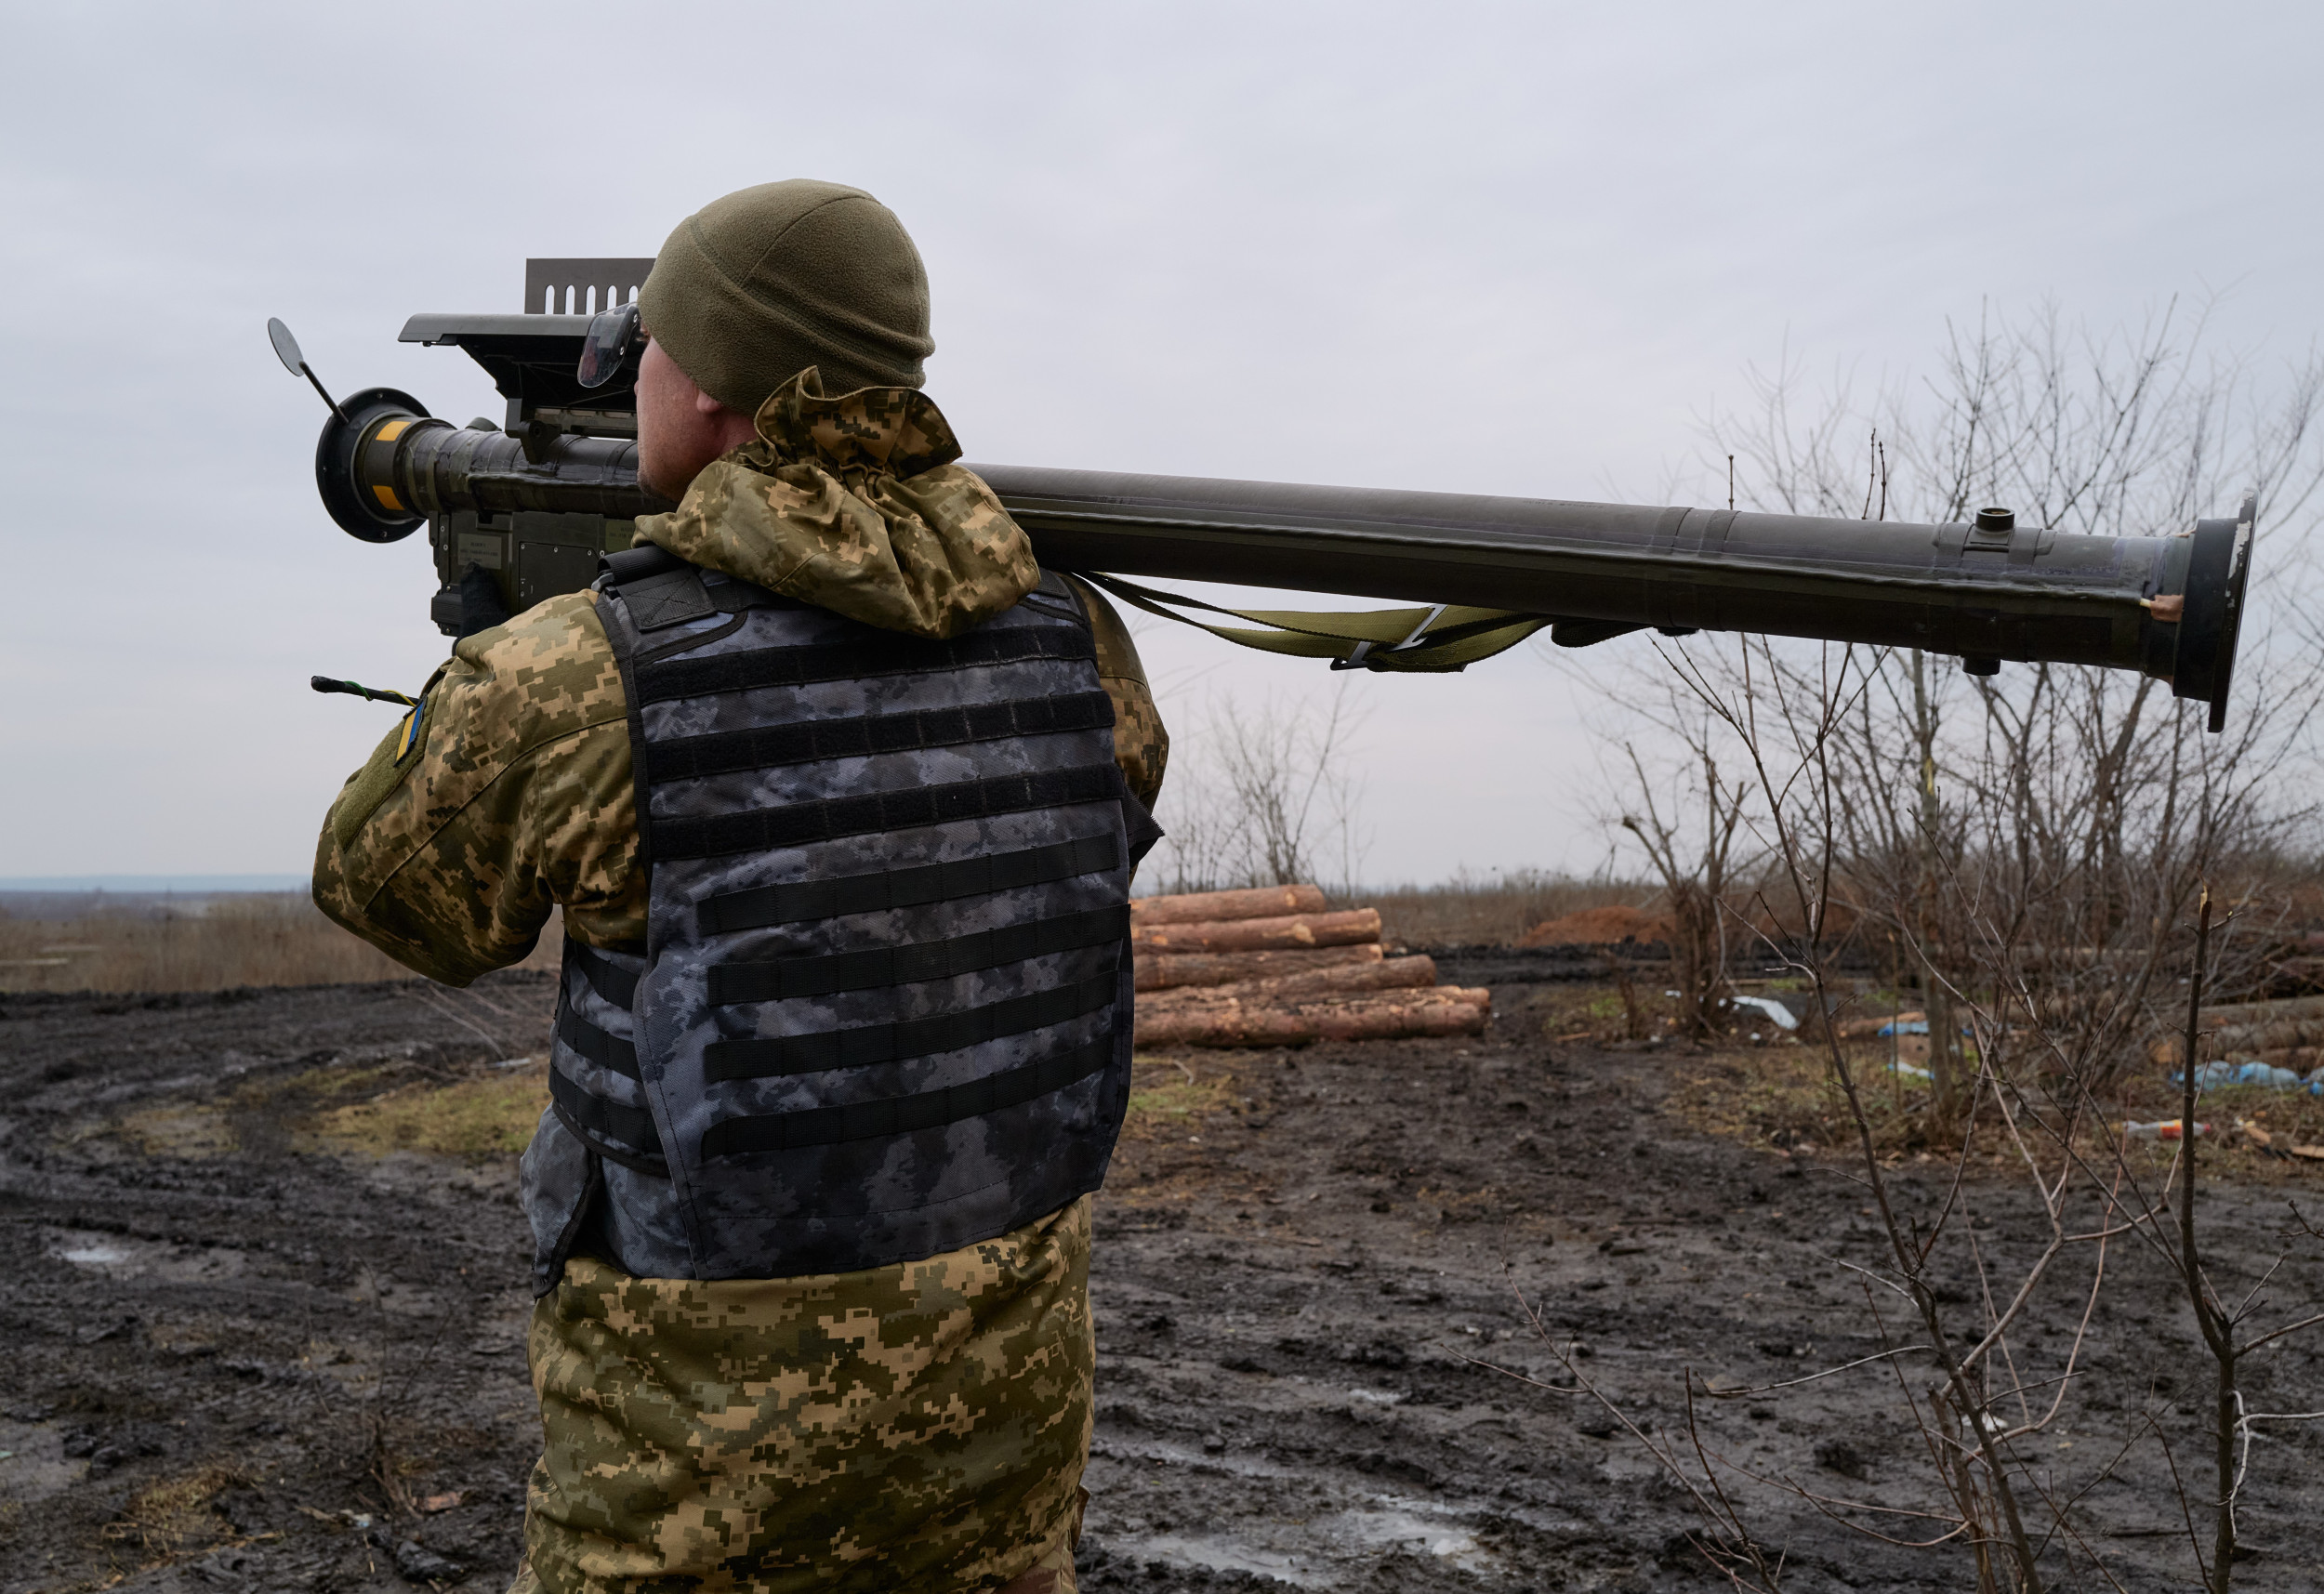 U.S. retirees called in to make Stinger missiles in boost for Ukraine